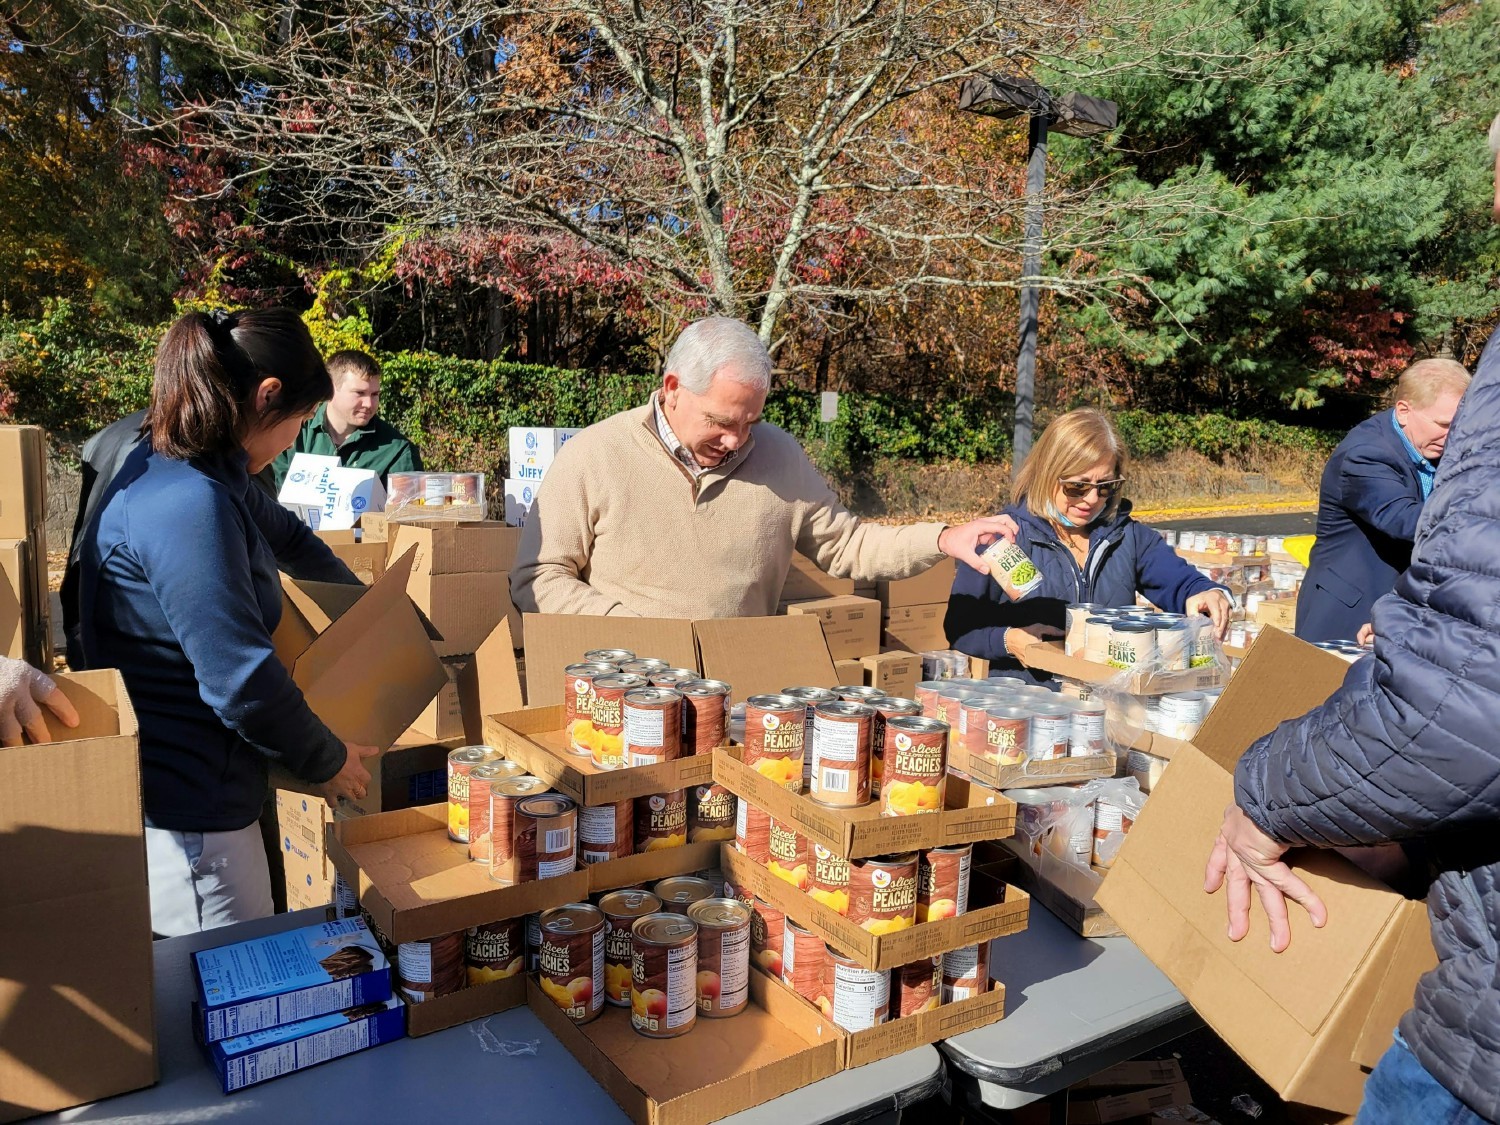 Verity Commercial participates in the Cornerstones Thanksgiving Basket Food Drive each year